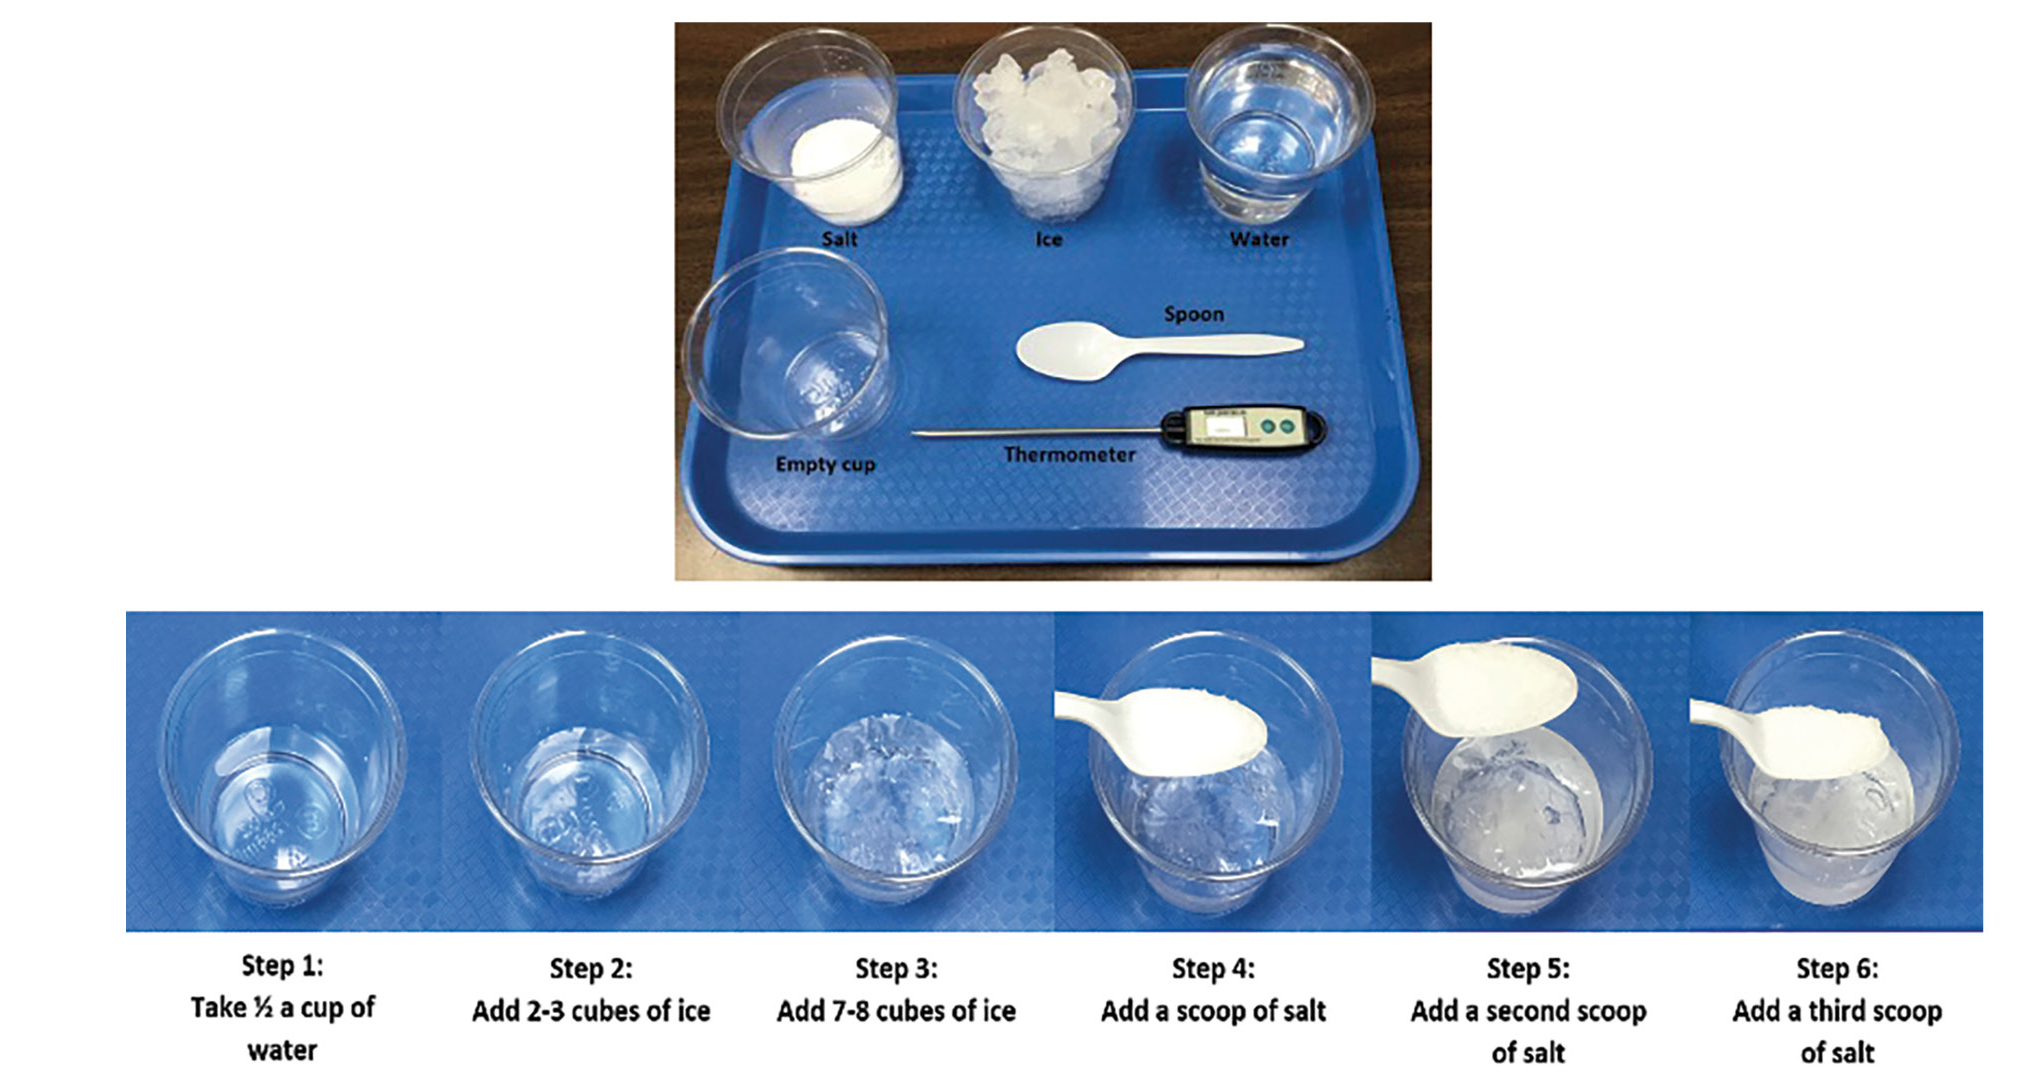 Samples with different combinations of ice and salt to produce different temperatures. The last cup on the right side is a water sample with a digital thermometer.